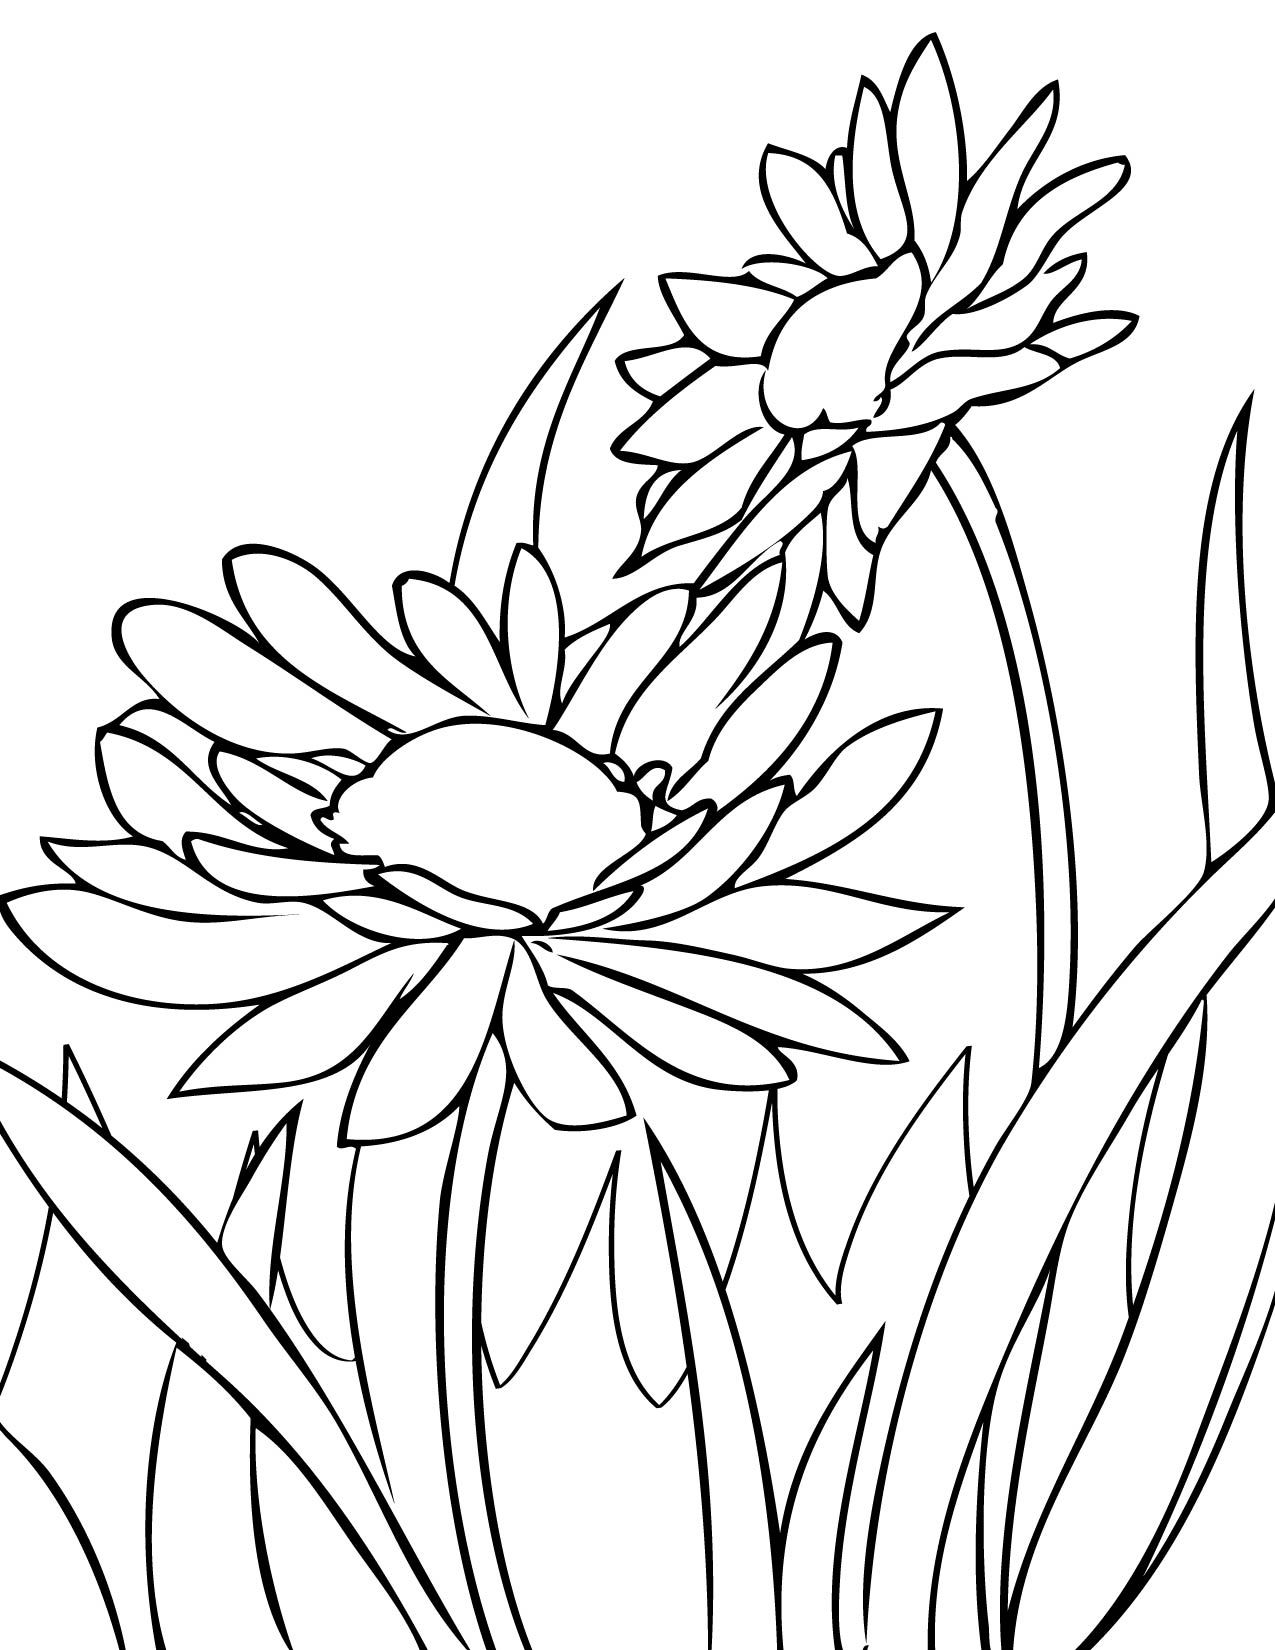 Coloring pages draw daisies print this page spring flowers coloring pages free flower realistic printable